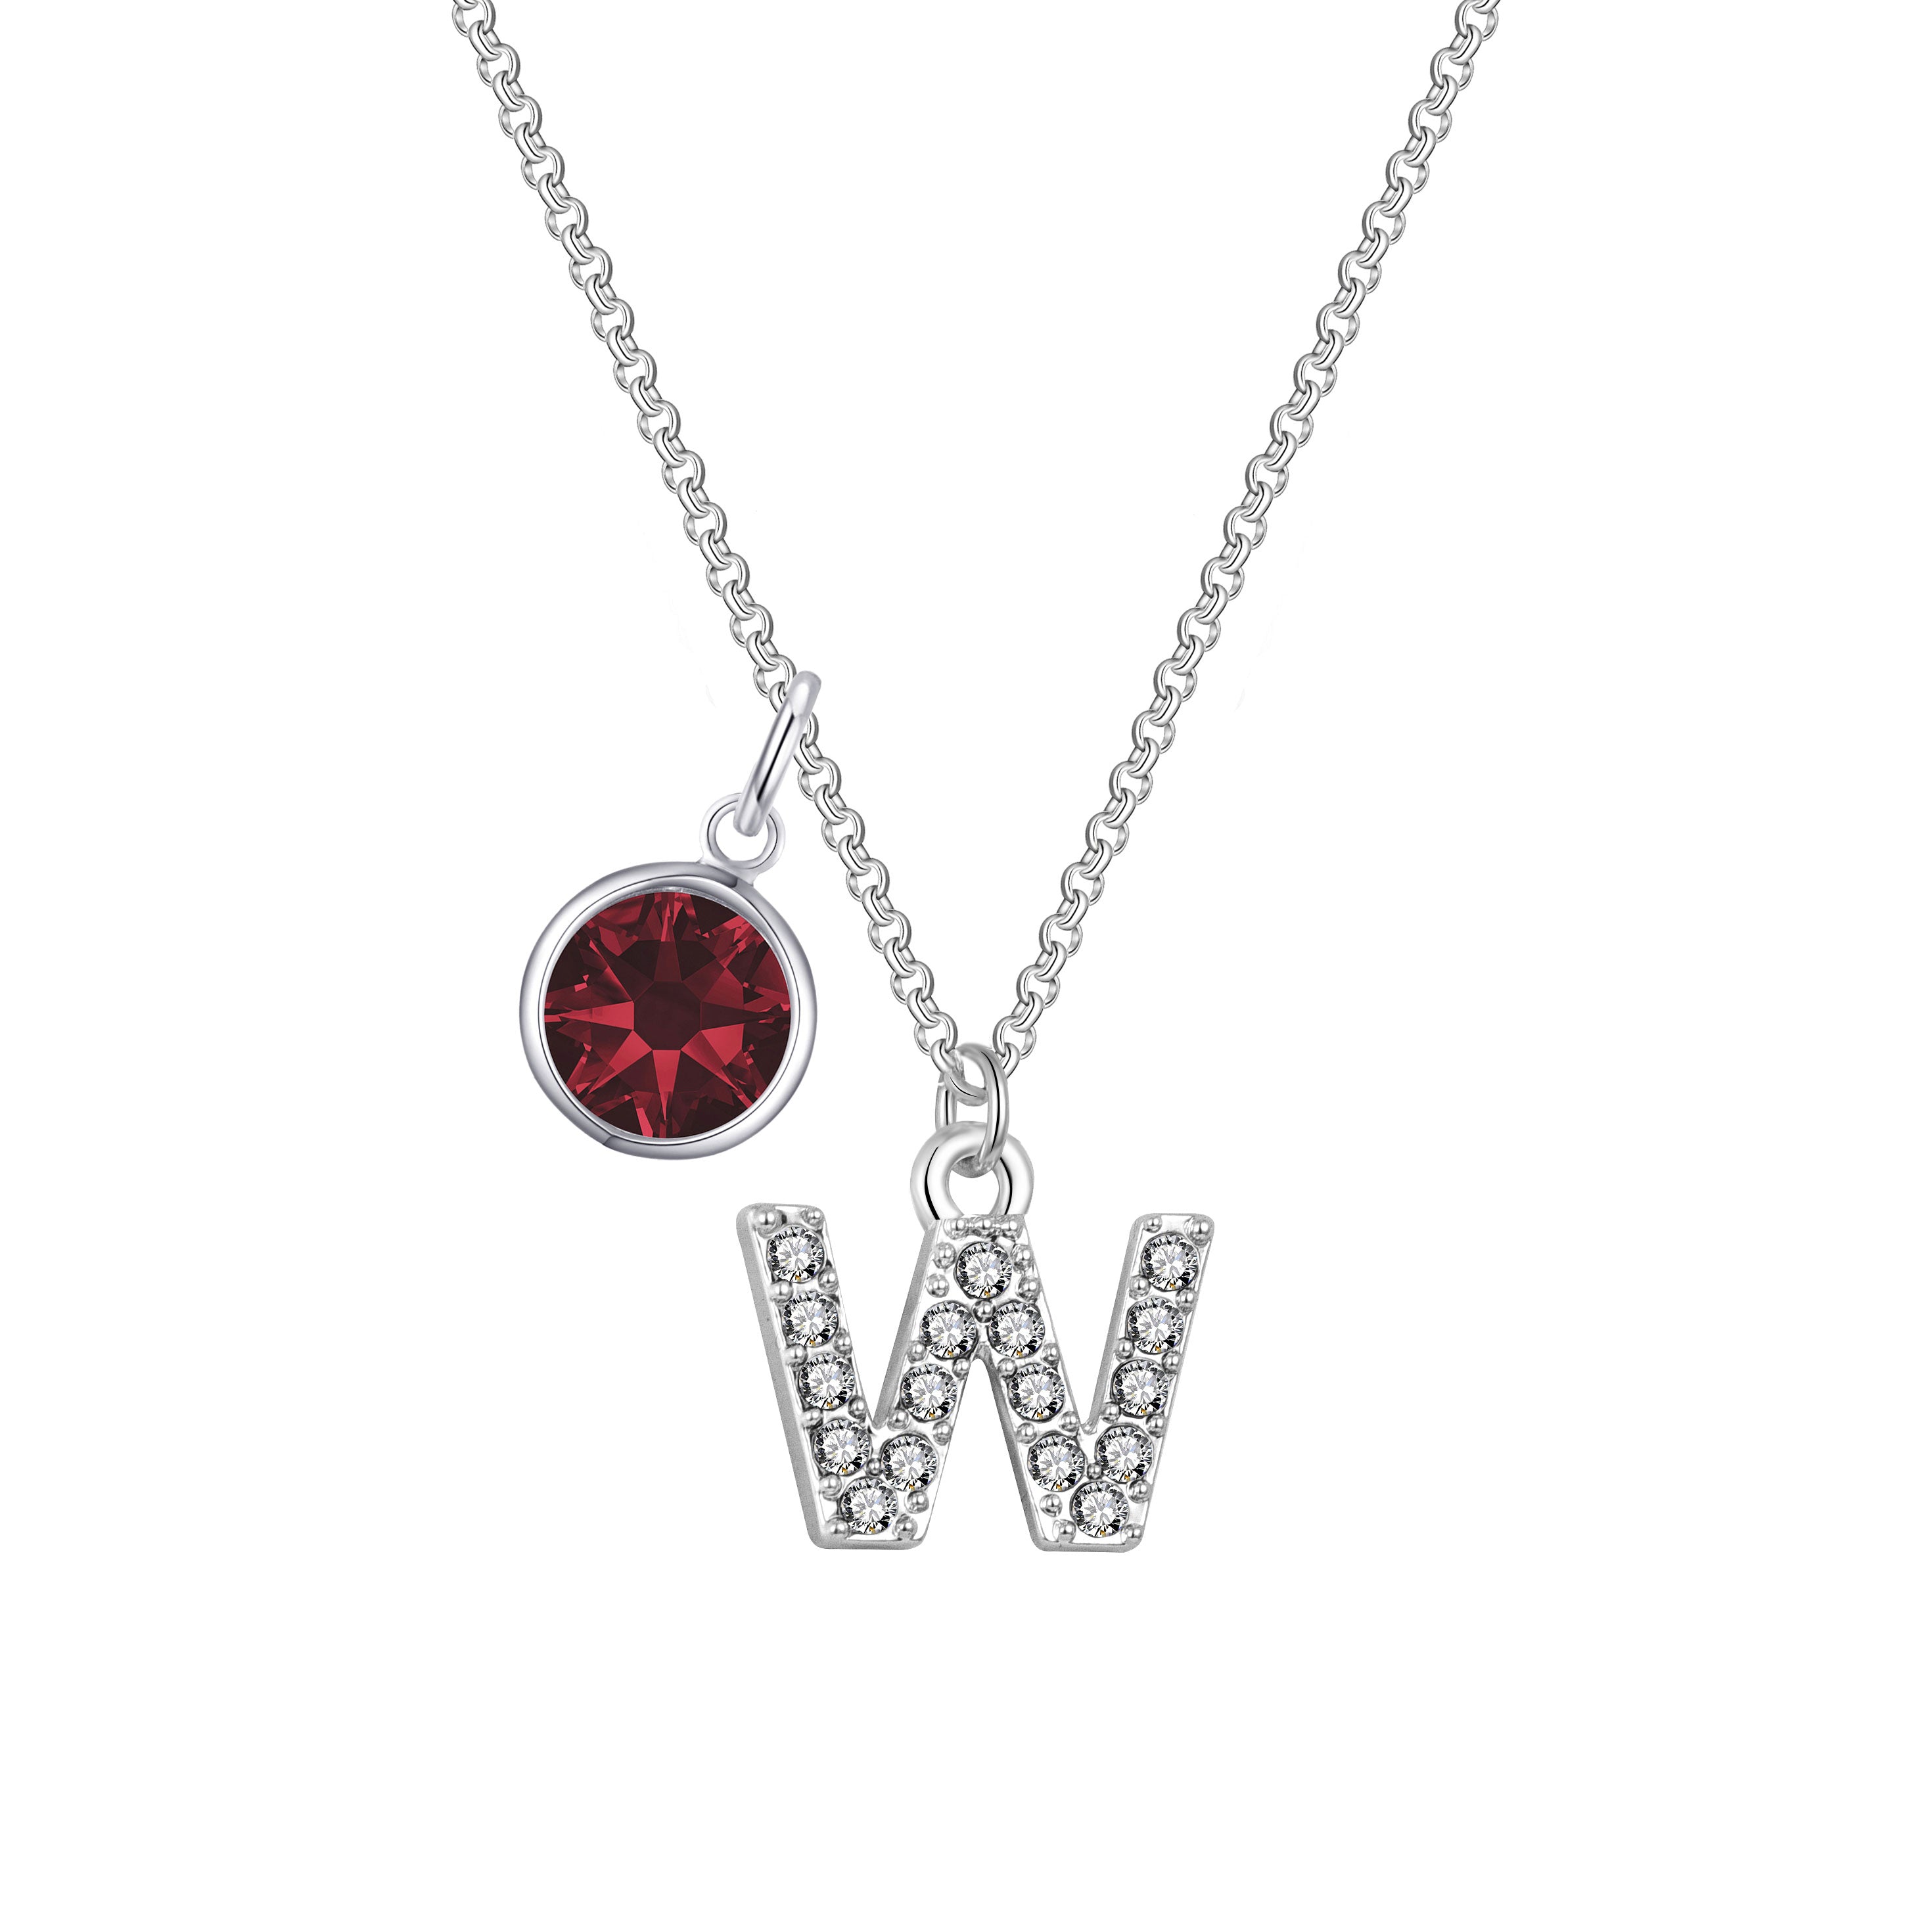 Pave Initial W Necklace with Birthstone Charm Created with Zircondia® Crystals